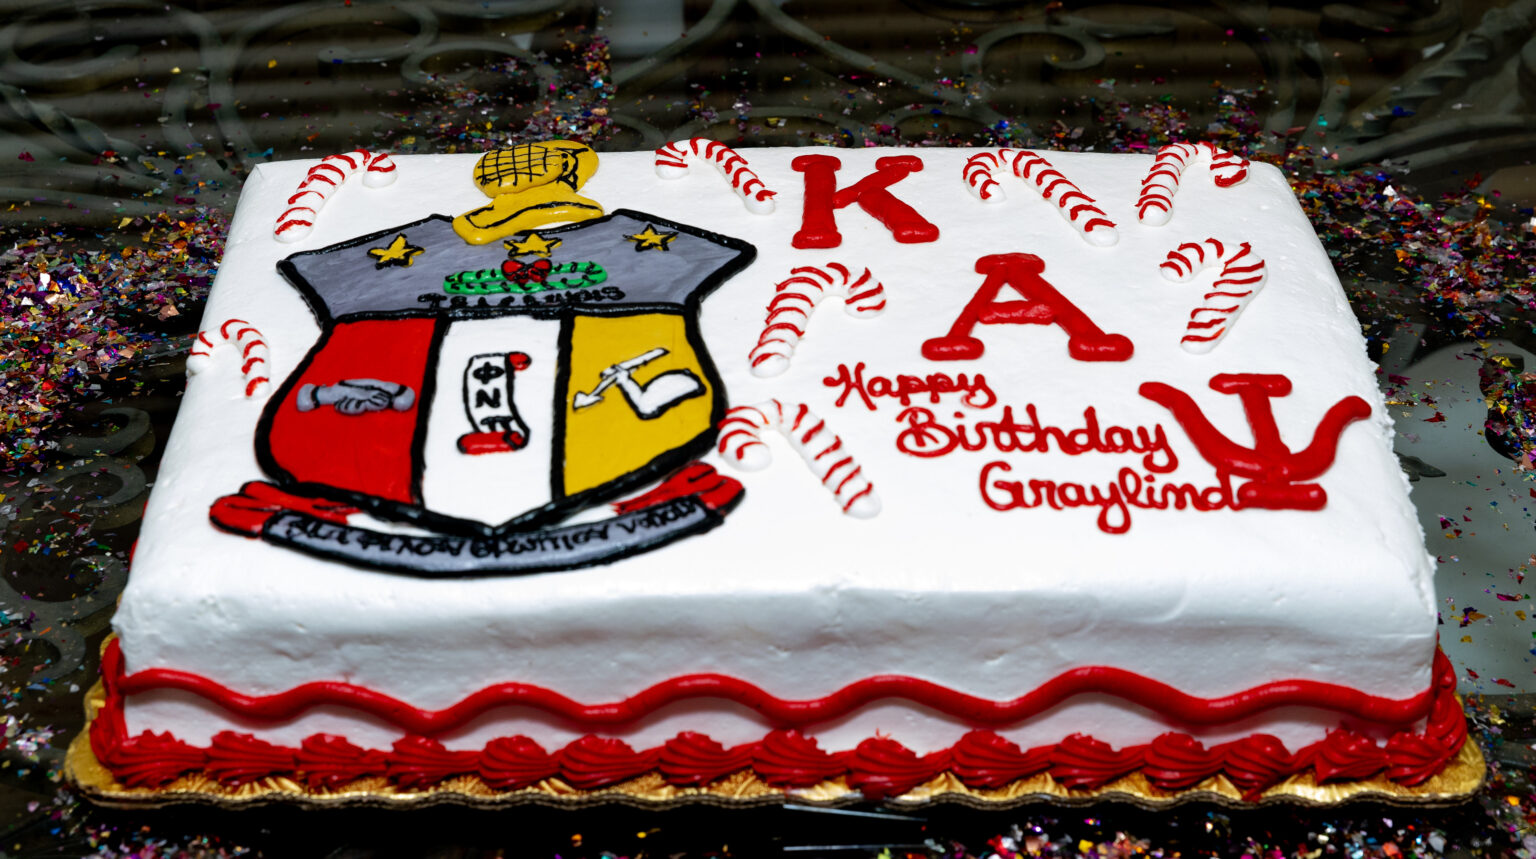 A cake with the name of kay and birthday on it.